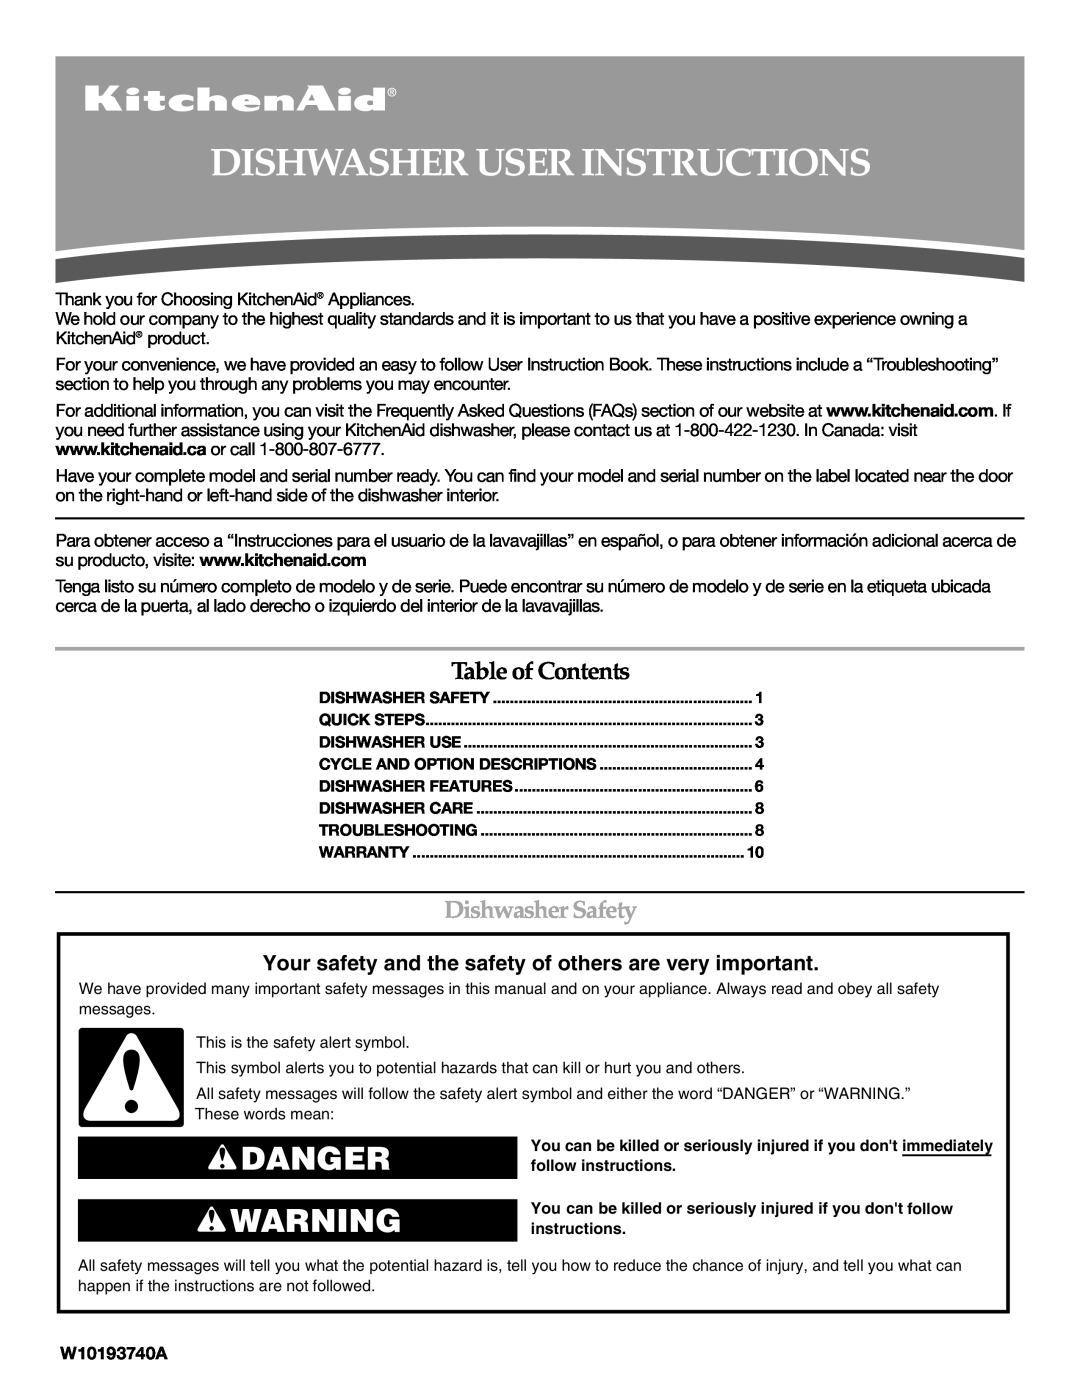 KitchenAid W10193741A warranty Dishwasher User Instructions, Danger, Table of Contents, Dishwasher Safety, W10193740A 